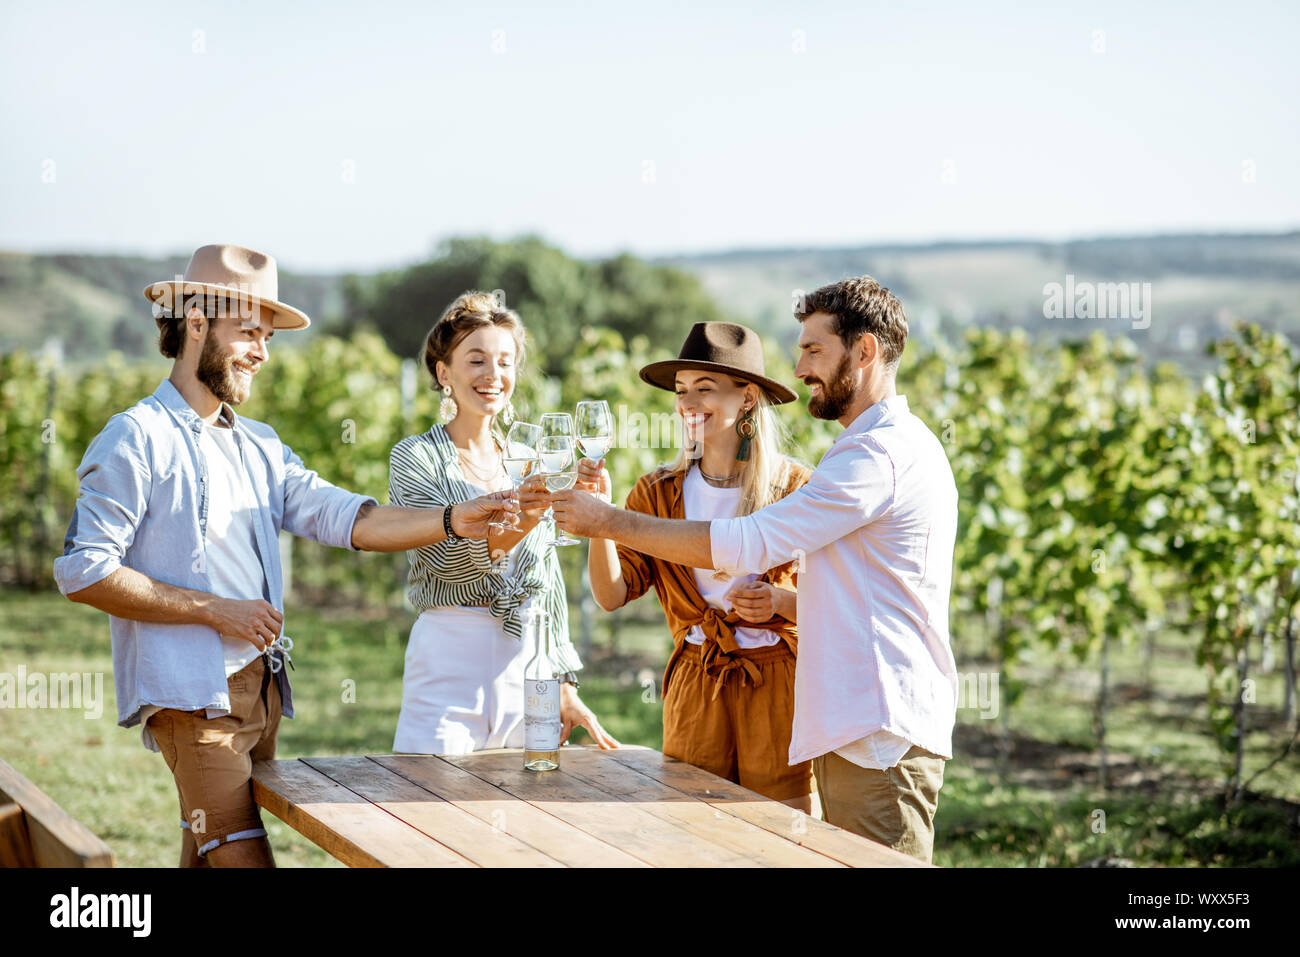 Group of young friends dressed casually having fun together, tasting wine on the vineyard on a sunny summer morning Stock Photo